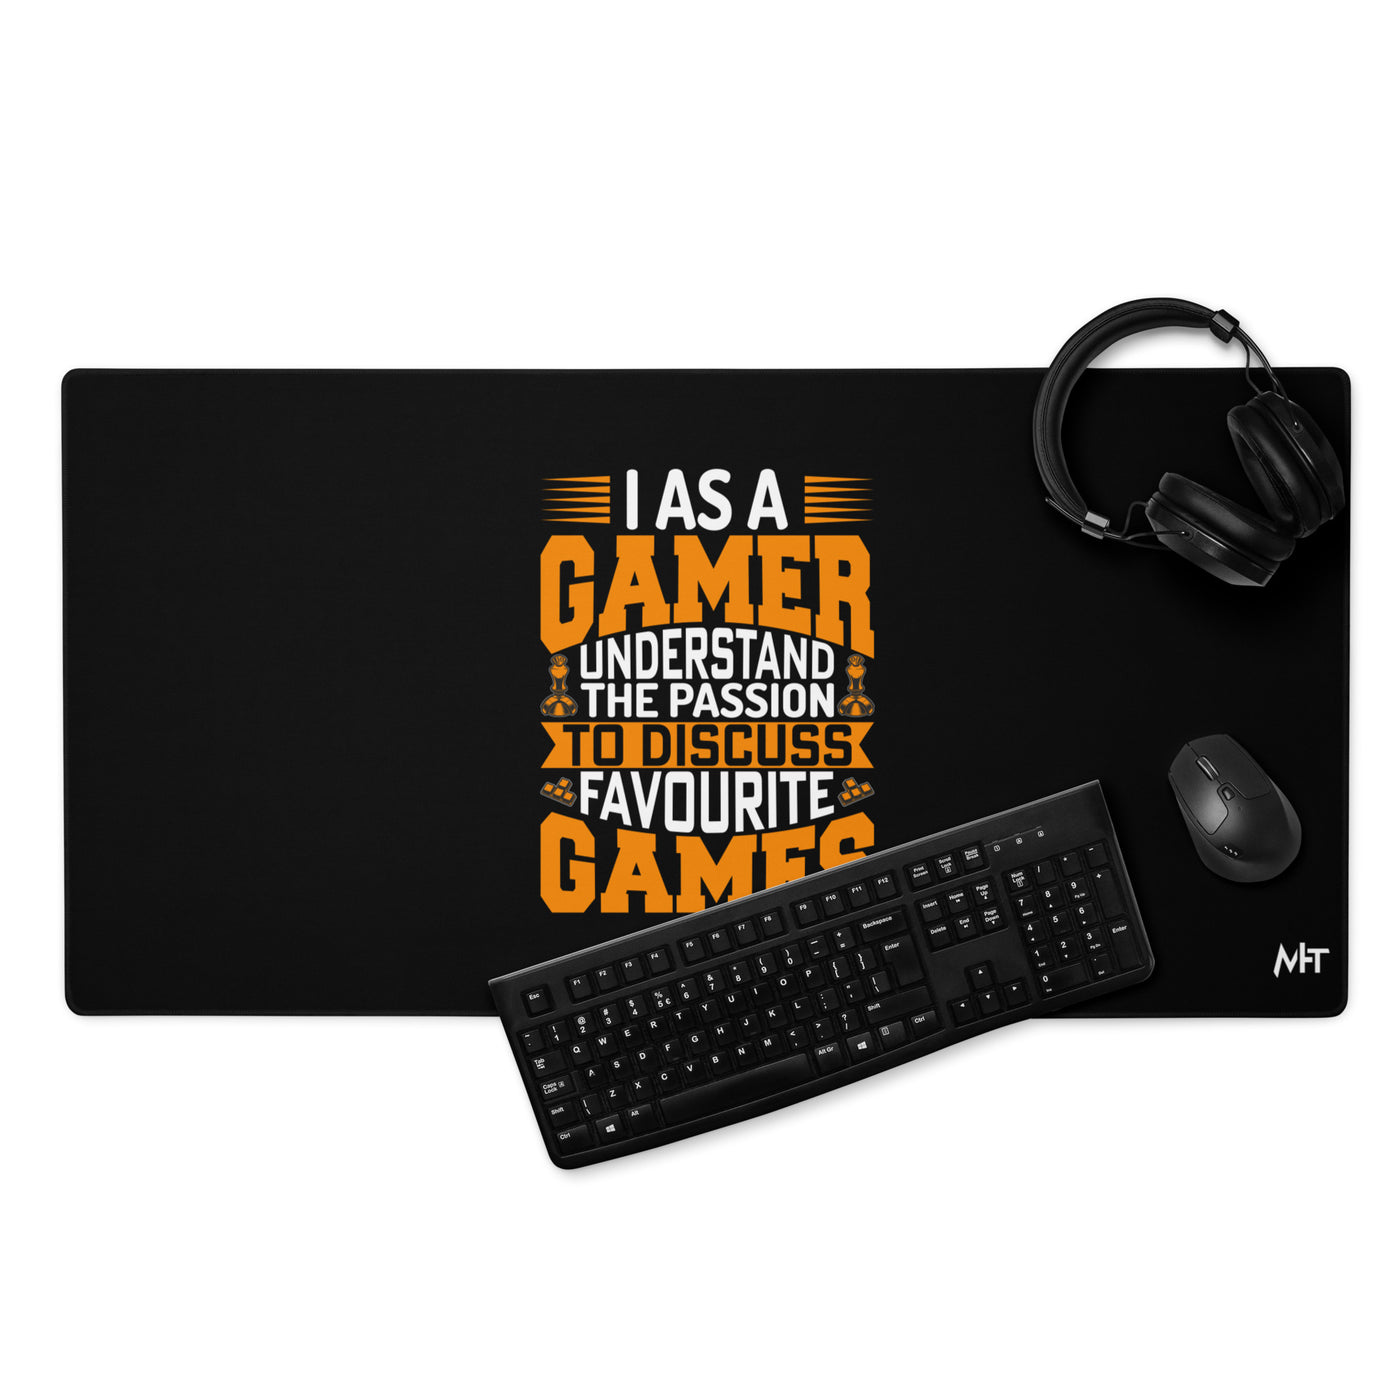 I, as a Gamer, Understand the Passion to Discuss Favorite Games - Desk Mat